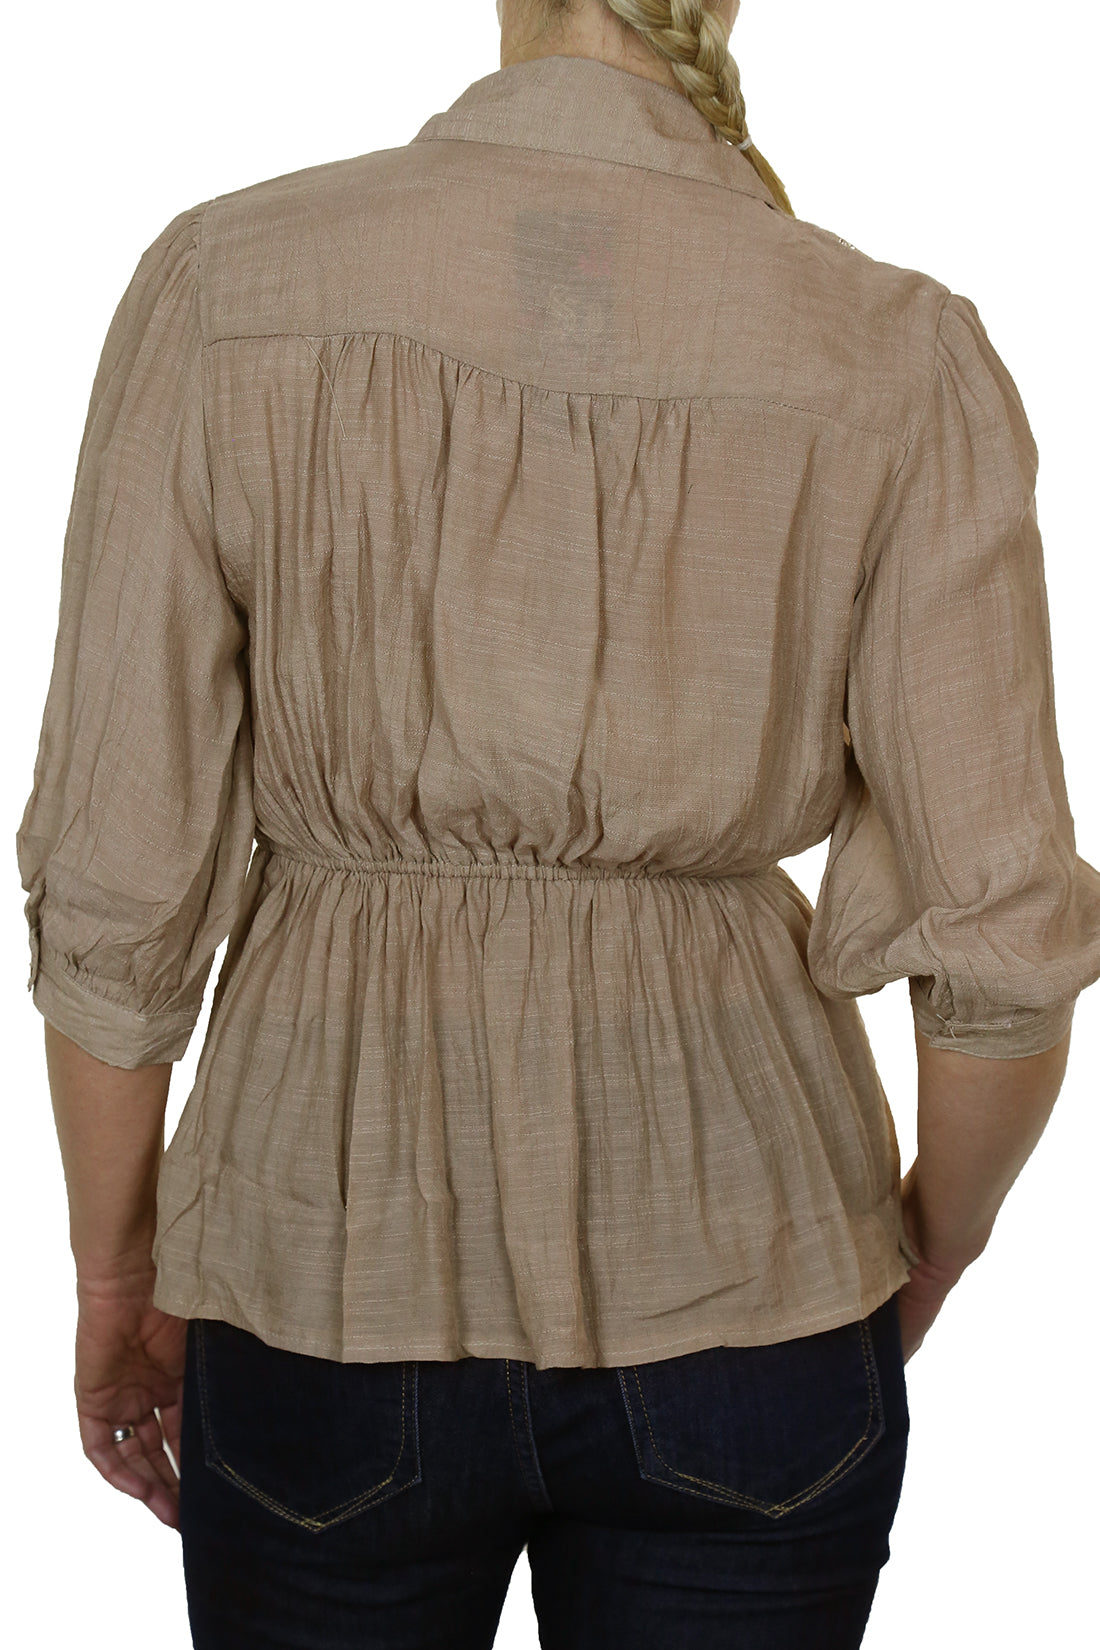 Crochet Lace Shirt Top With Frill Detail Light Brown